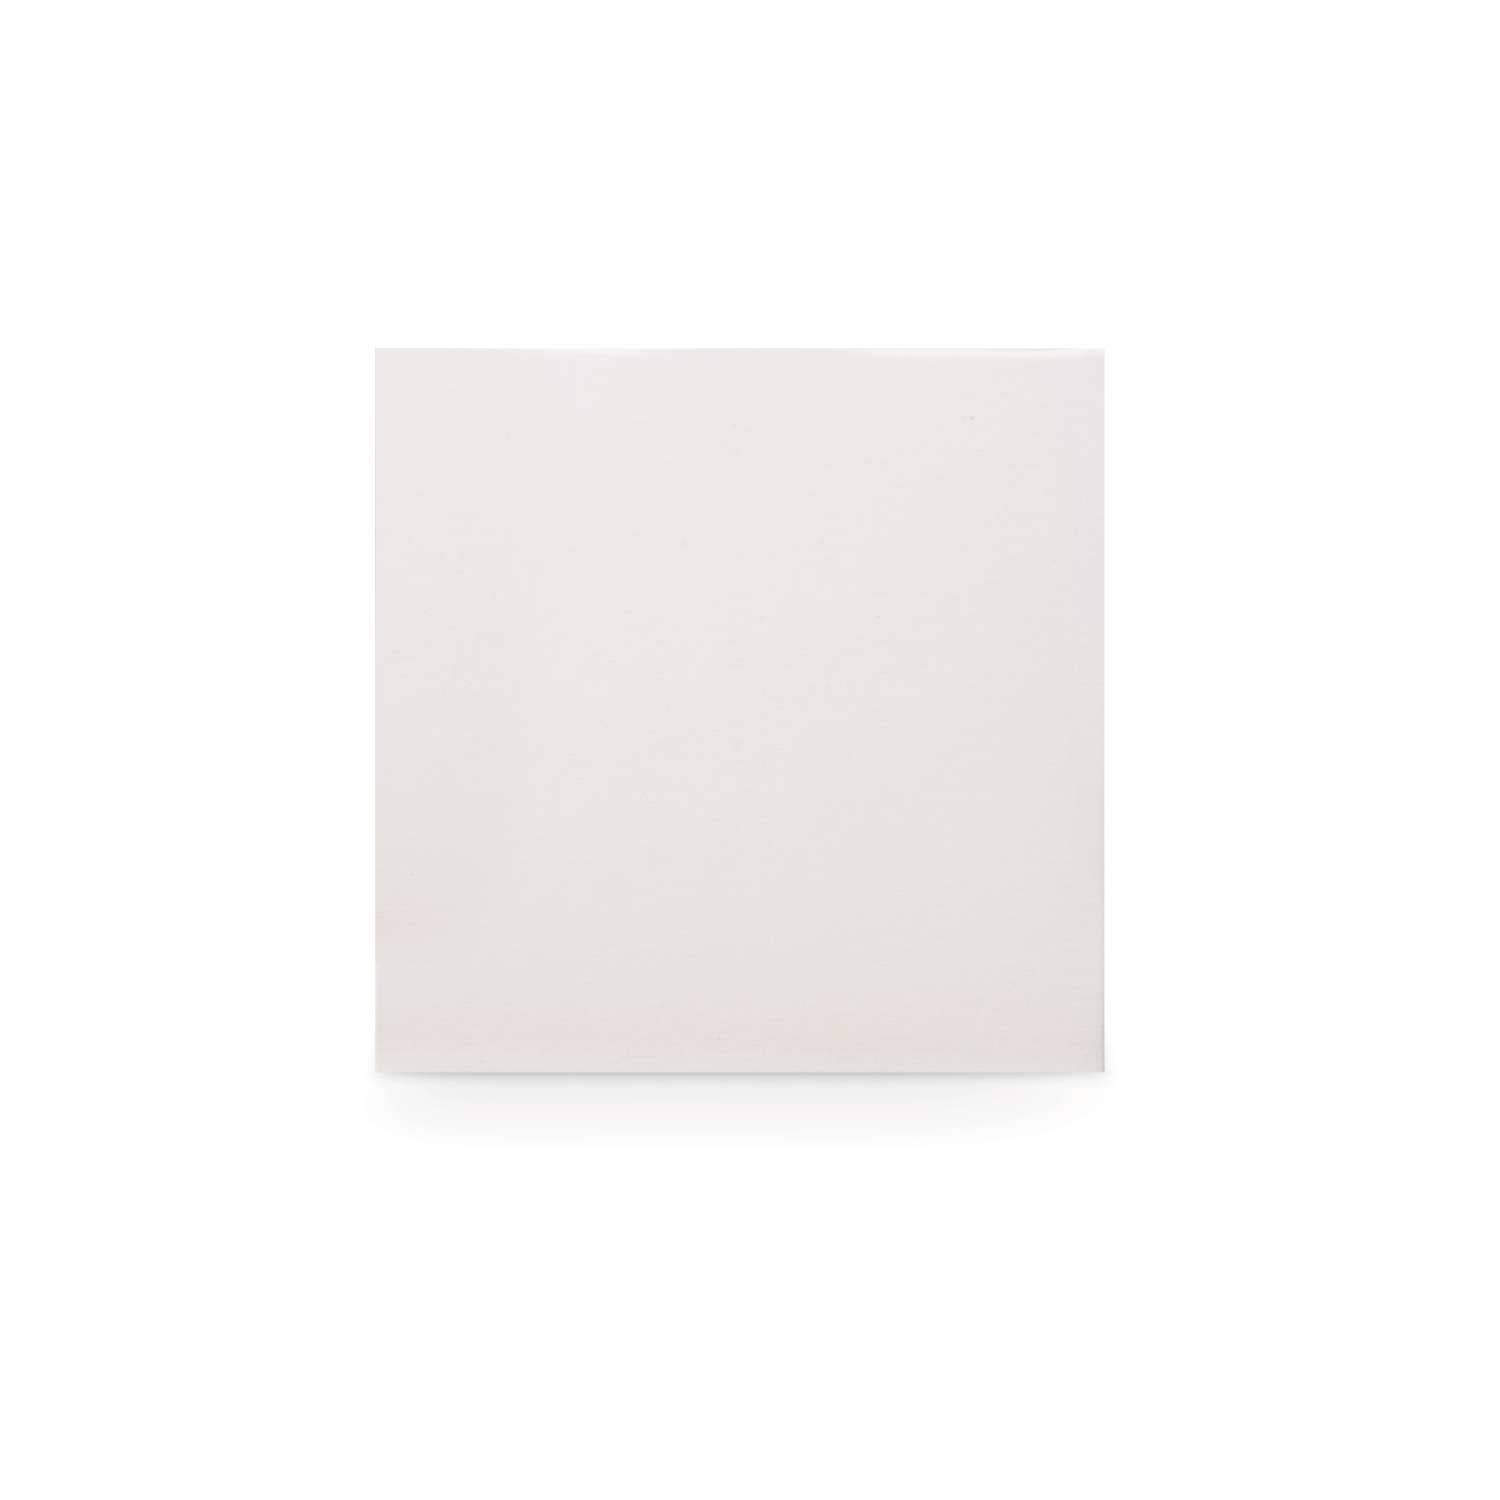 3 mm Thick 55 x 46 cm Portrait Clairefontaine White Canvas Board 